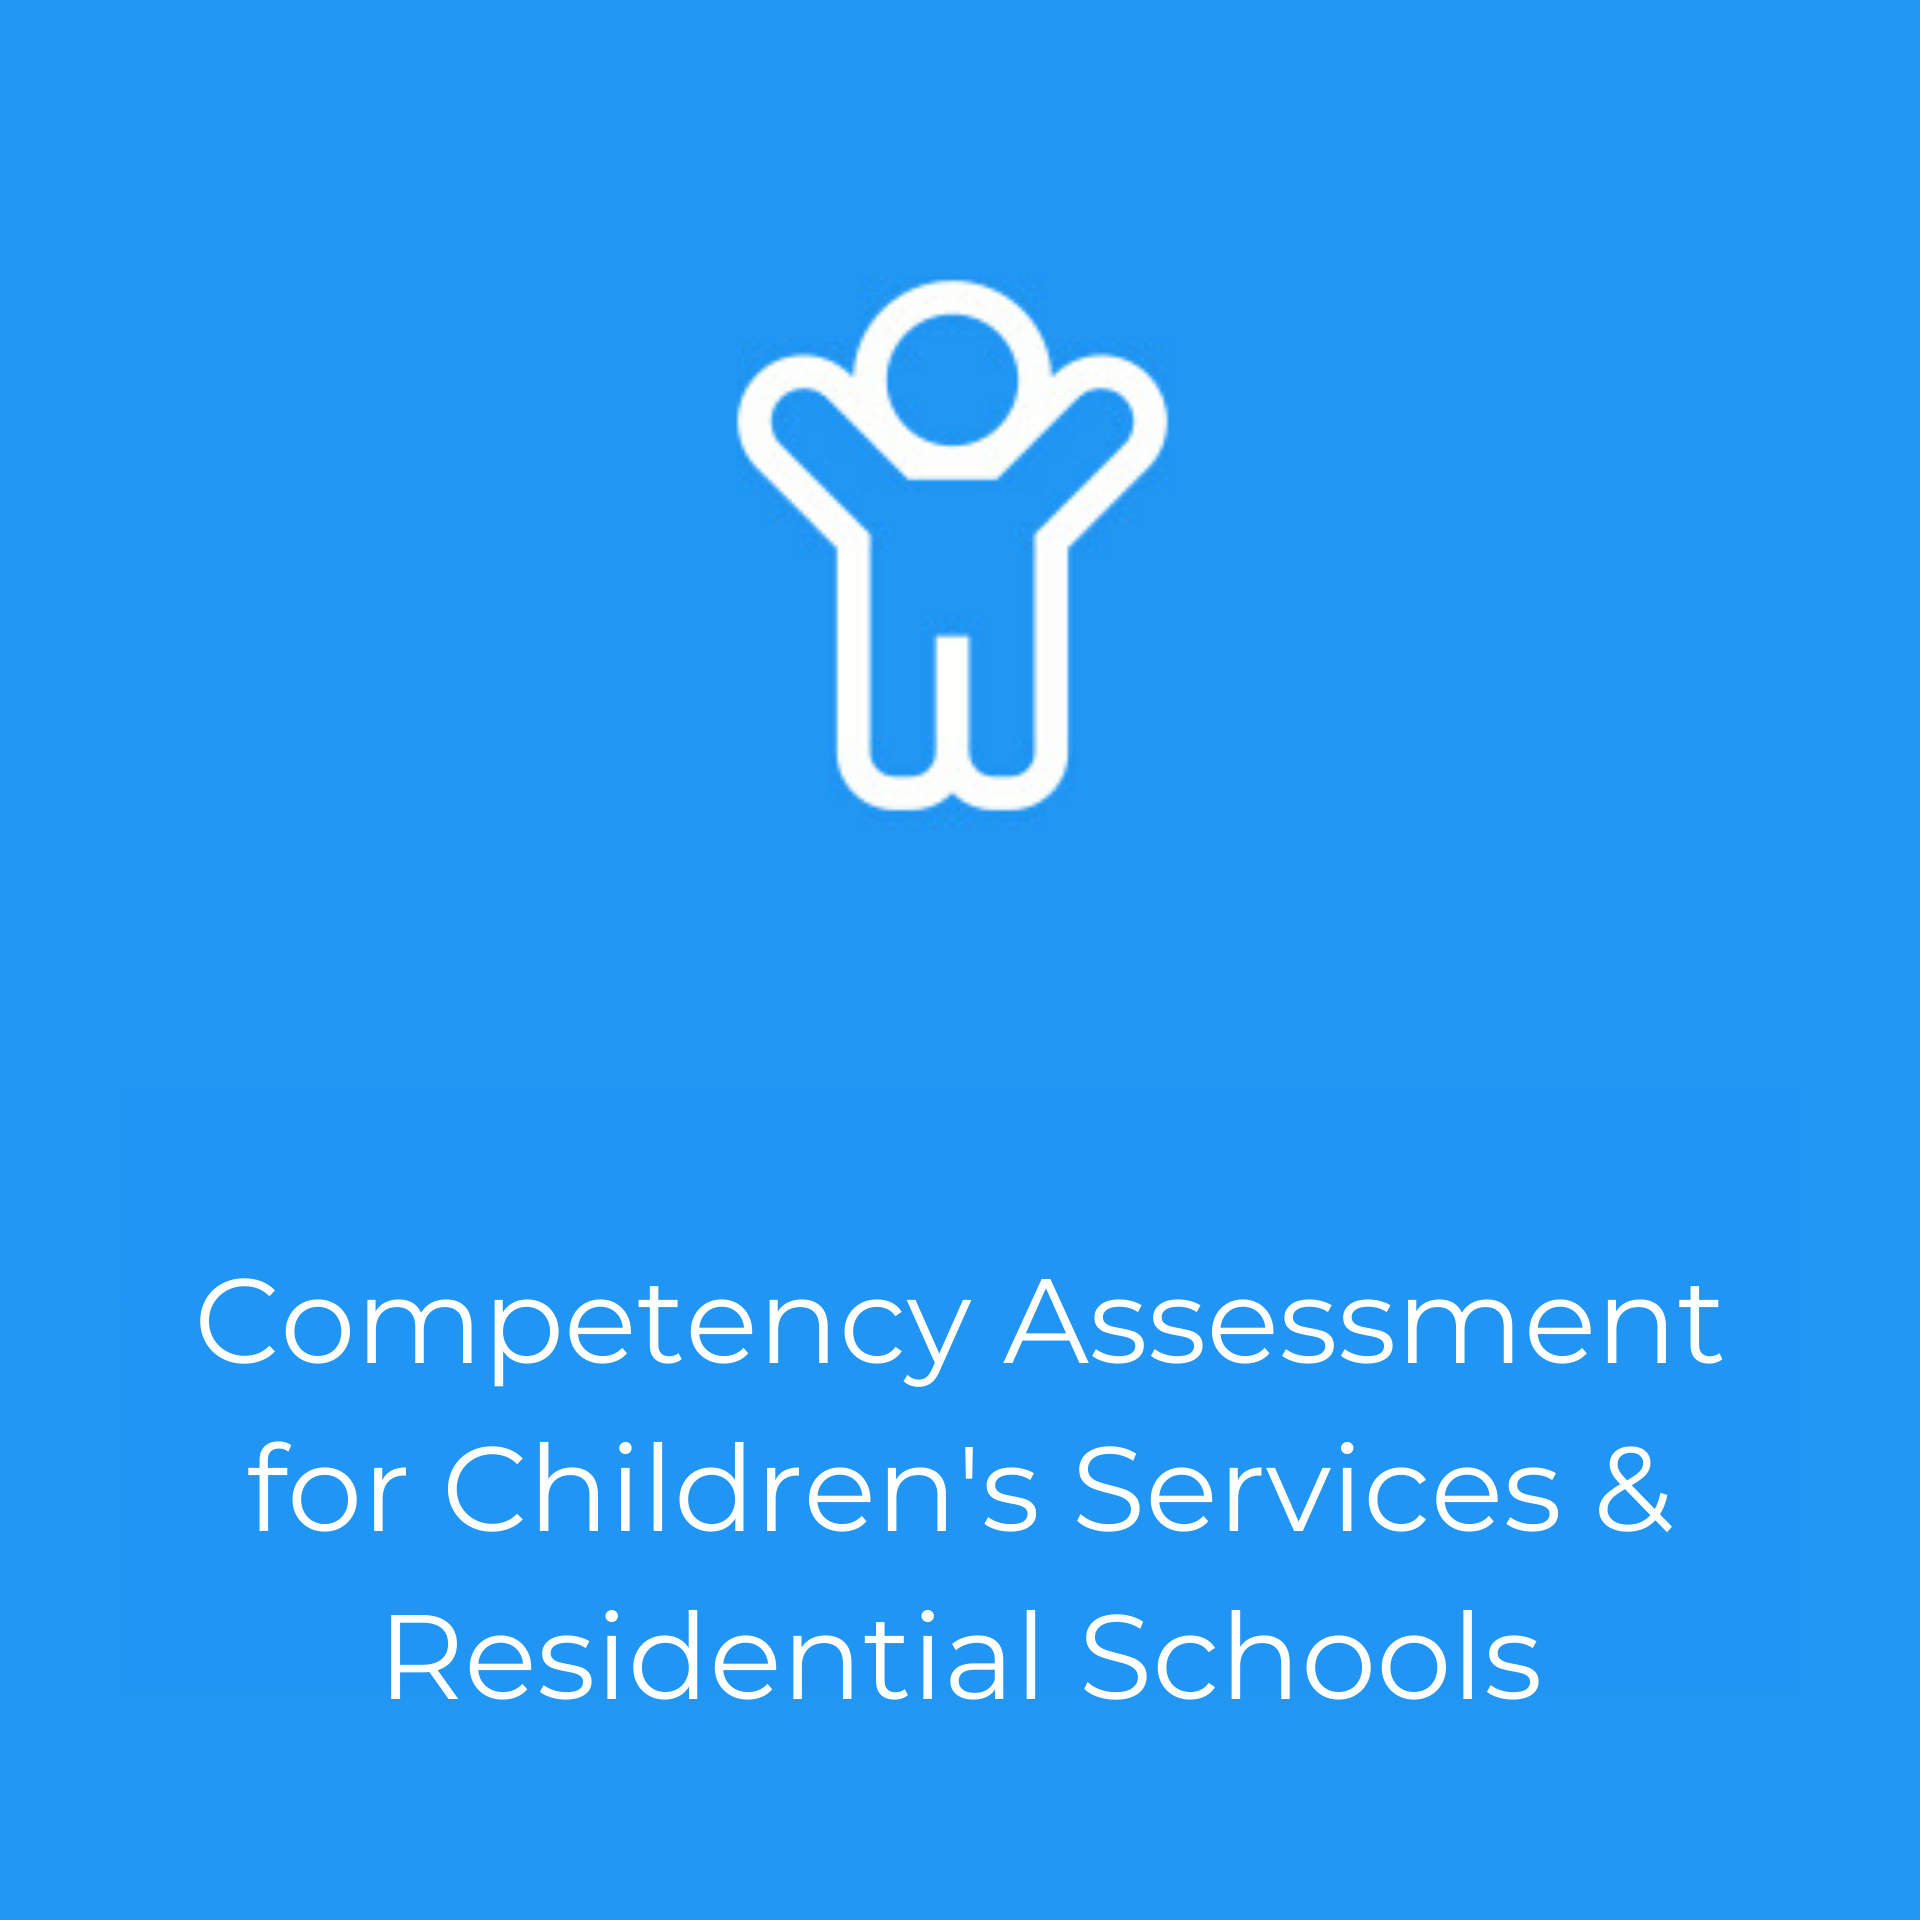 Competency Assessment for Children’s Services & Residential Schools (1)